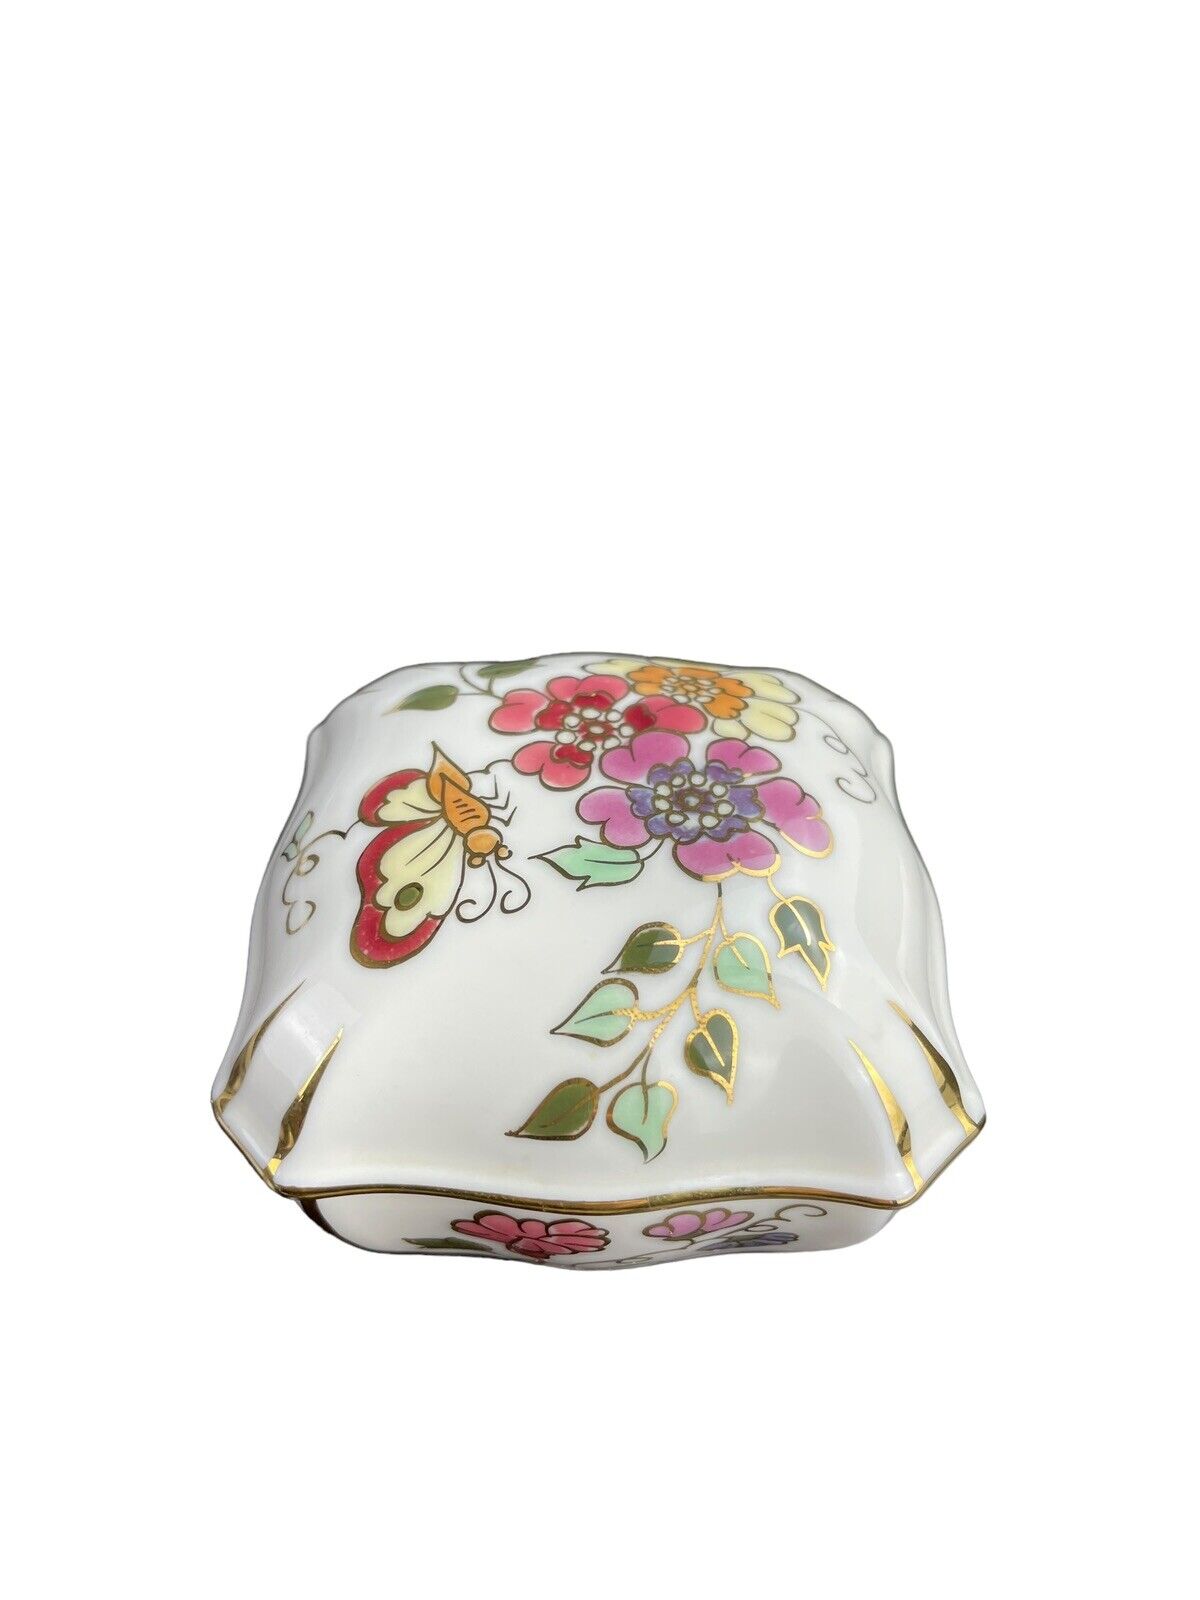 ZSOLNAY HUNGARY PORCELAIN COVERED TRINKET BOX FLOWER PATTERN BUTTERFLY PINK